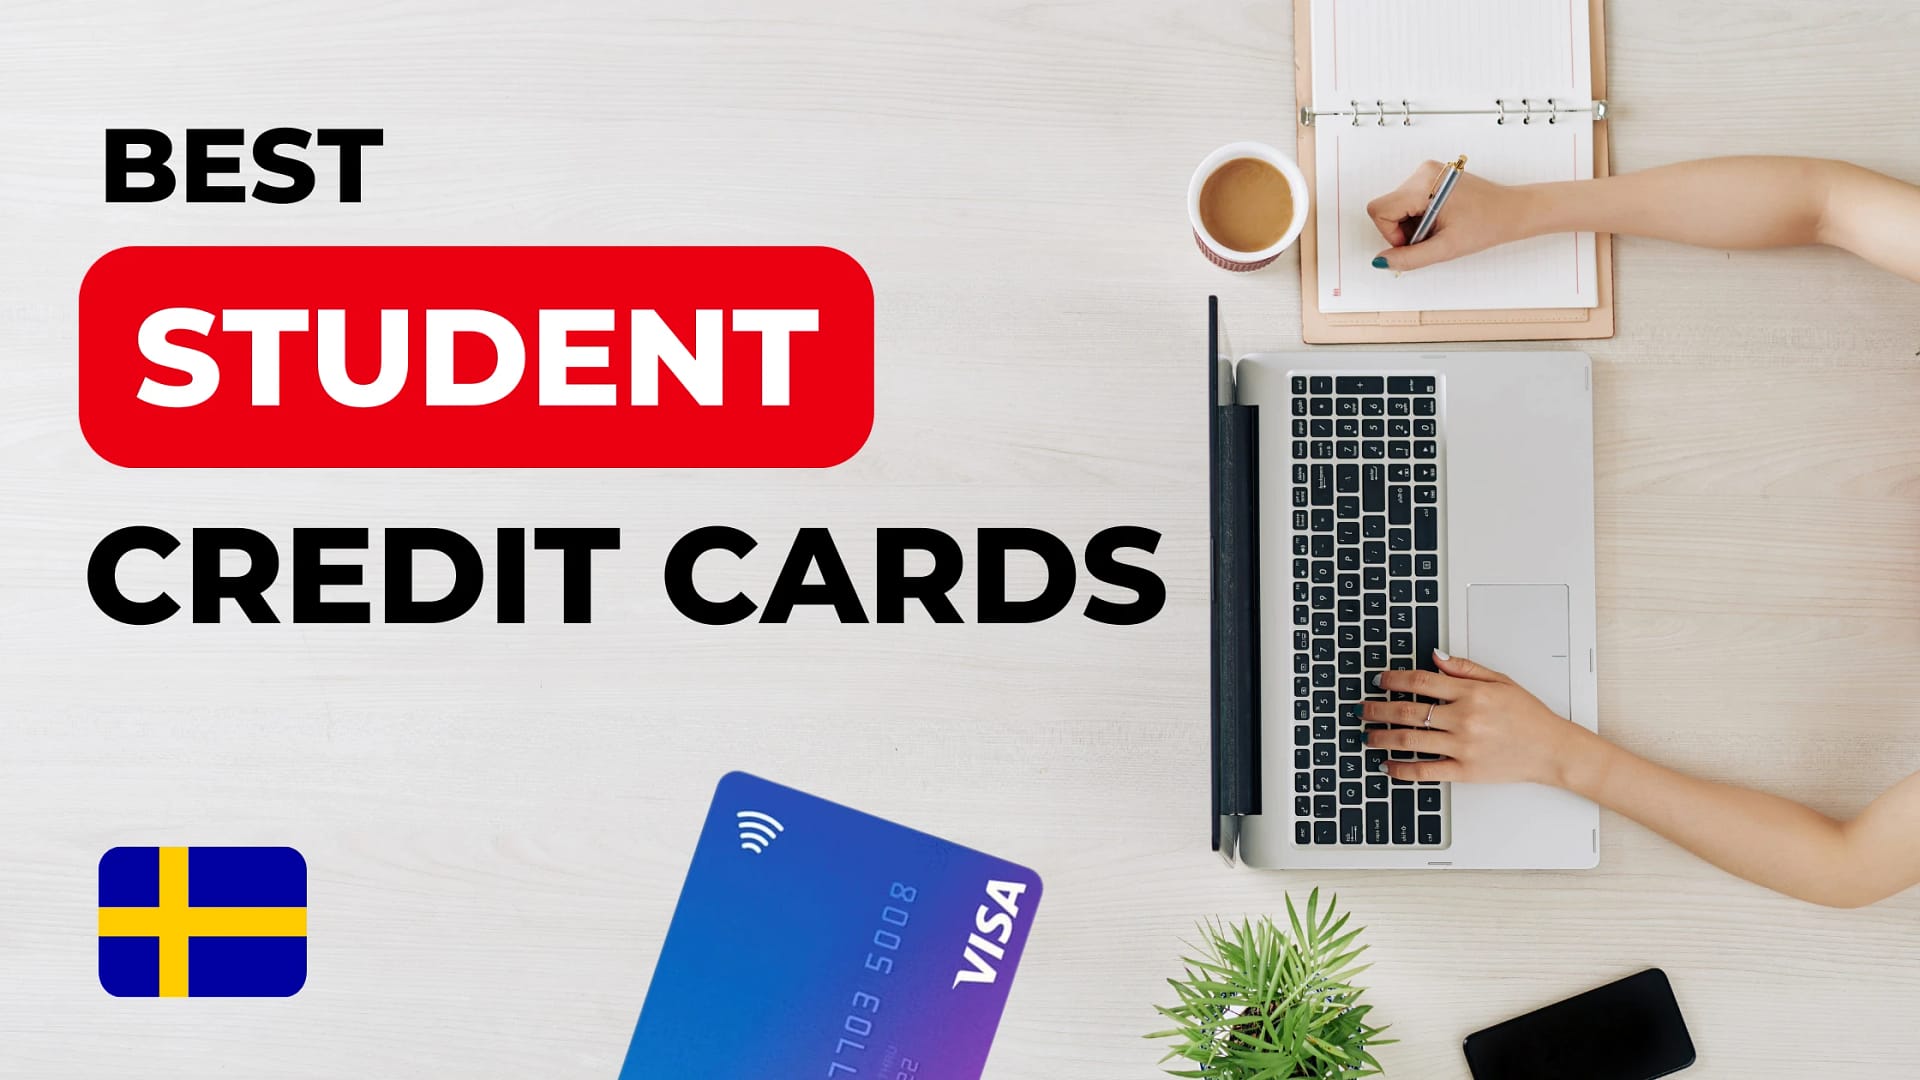 Best Student Credit Cards in Sweden (Guide)